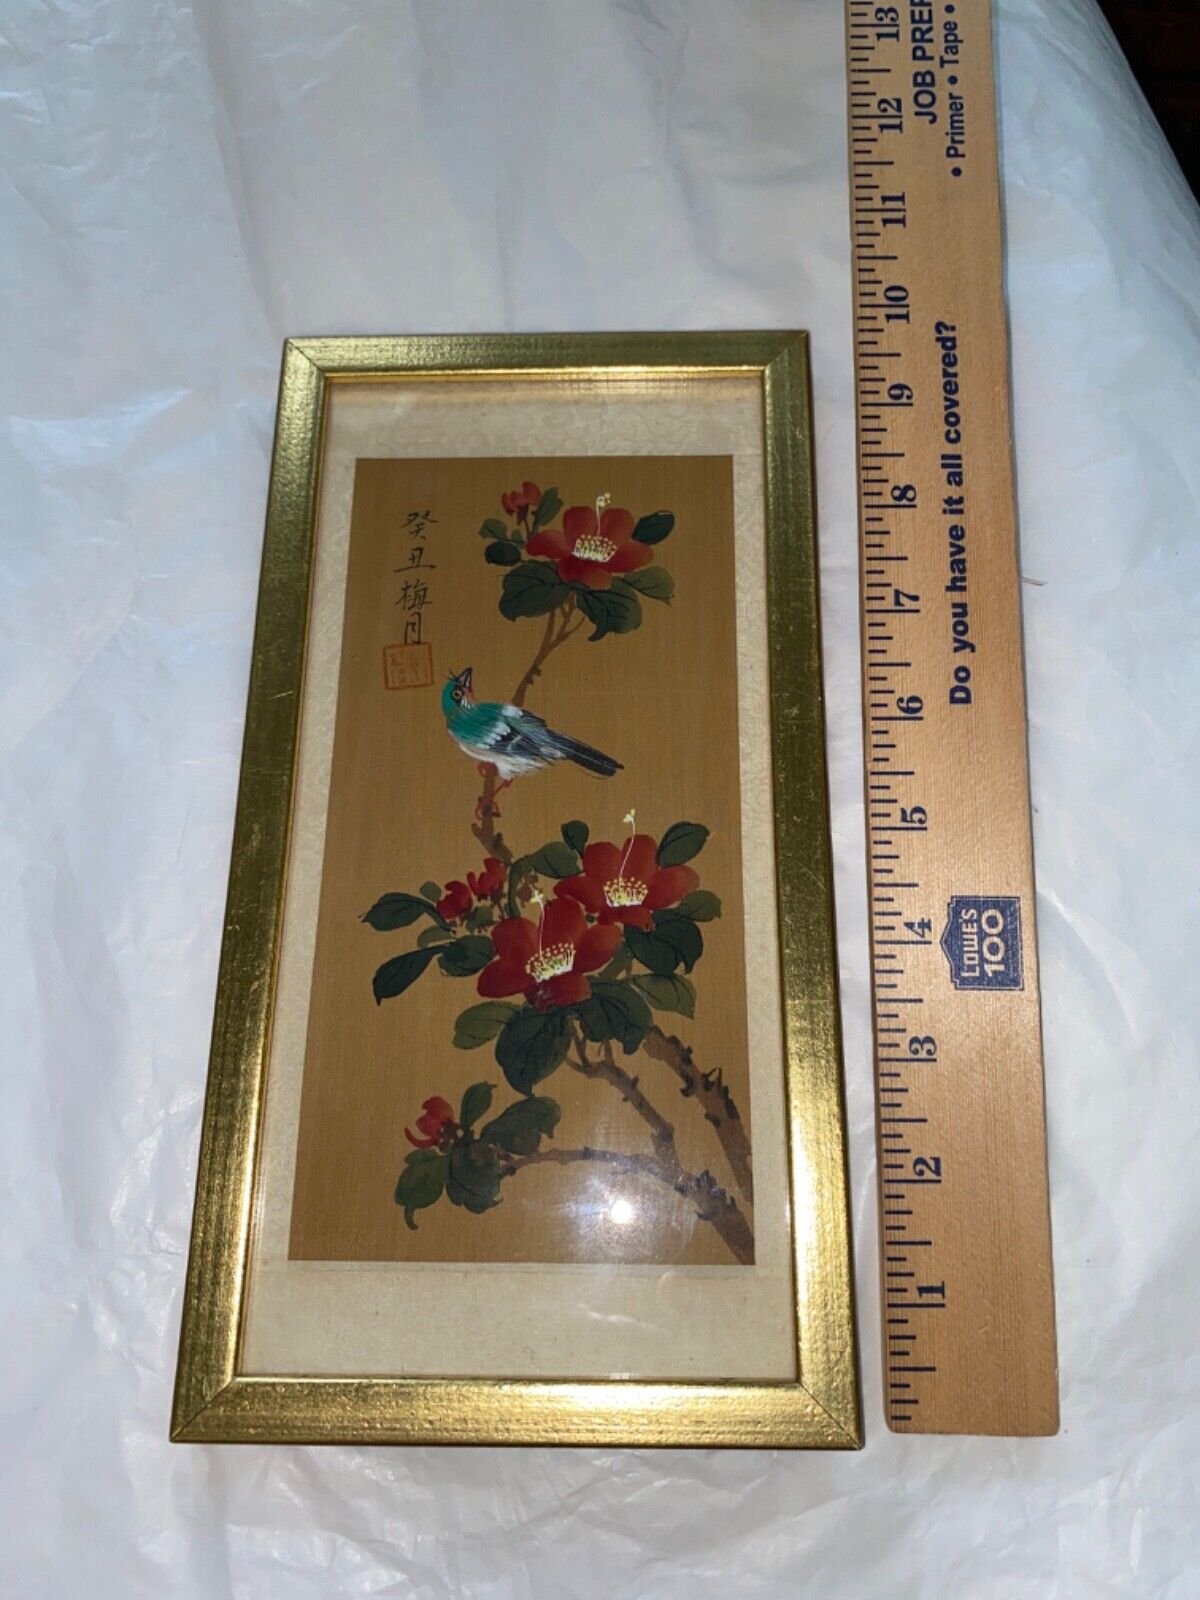 Vintage/Antique Signed Original Asian Painting on Silk Featuring Bird on Branch